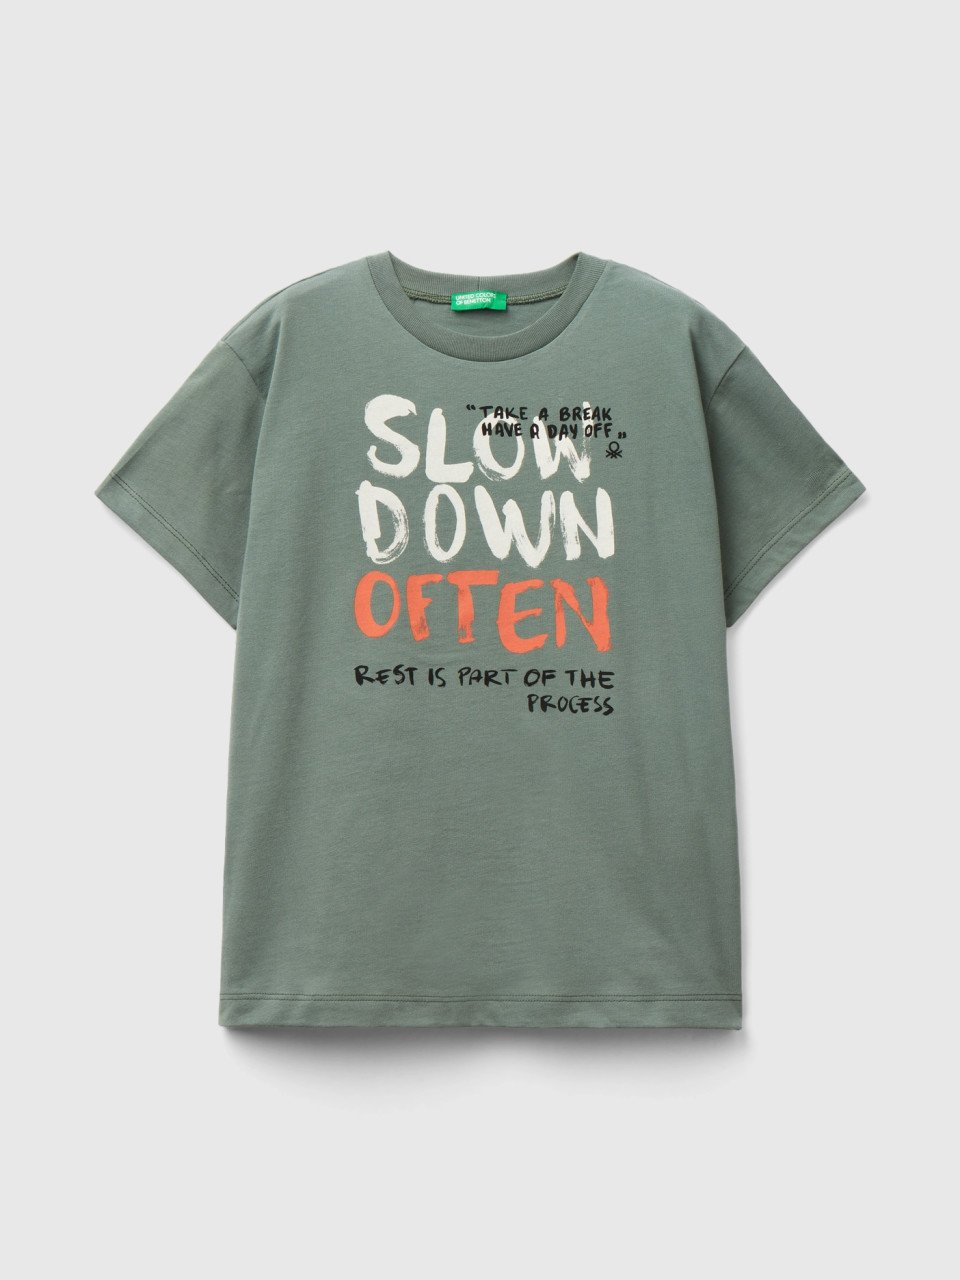 Benetton, T-shirt In Organic Cotton With Print, Military Green, Kids